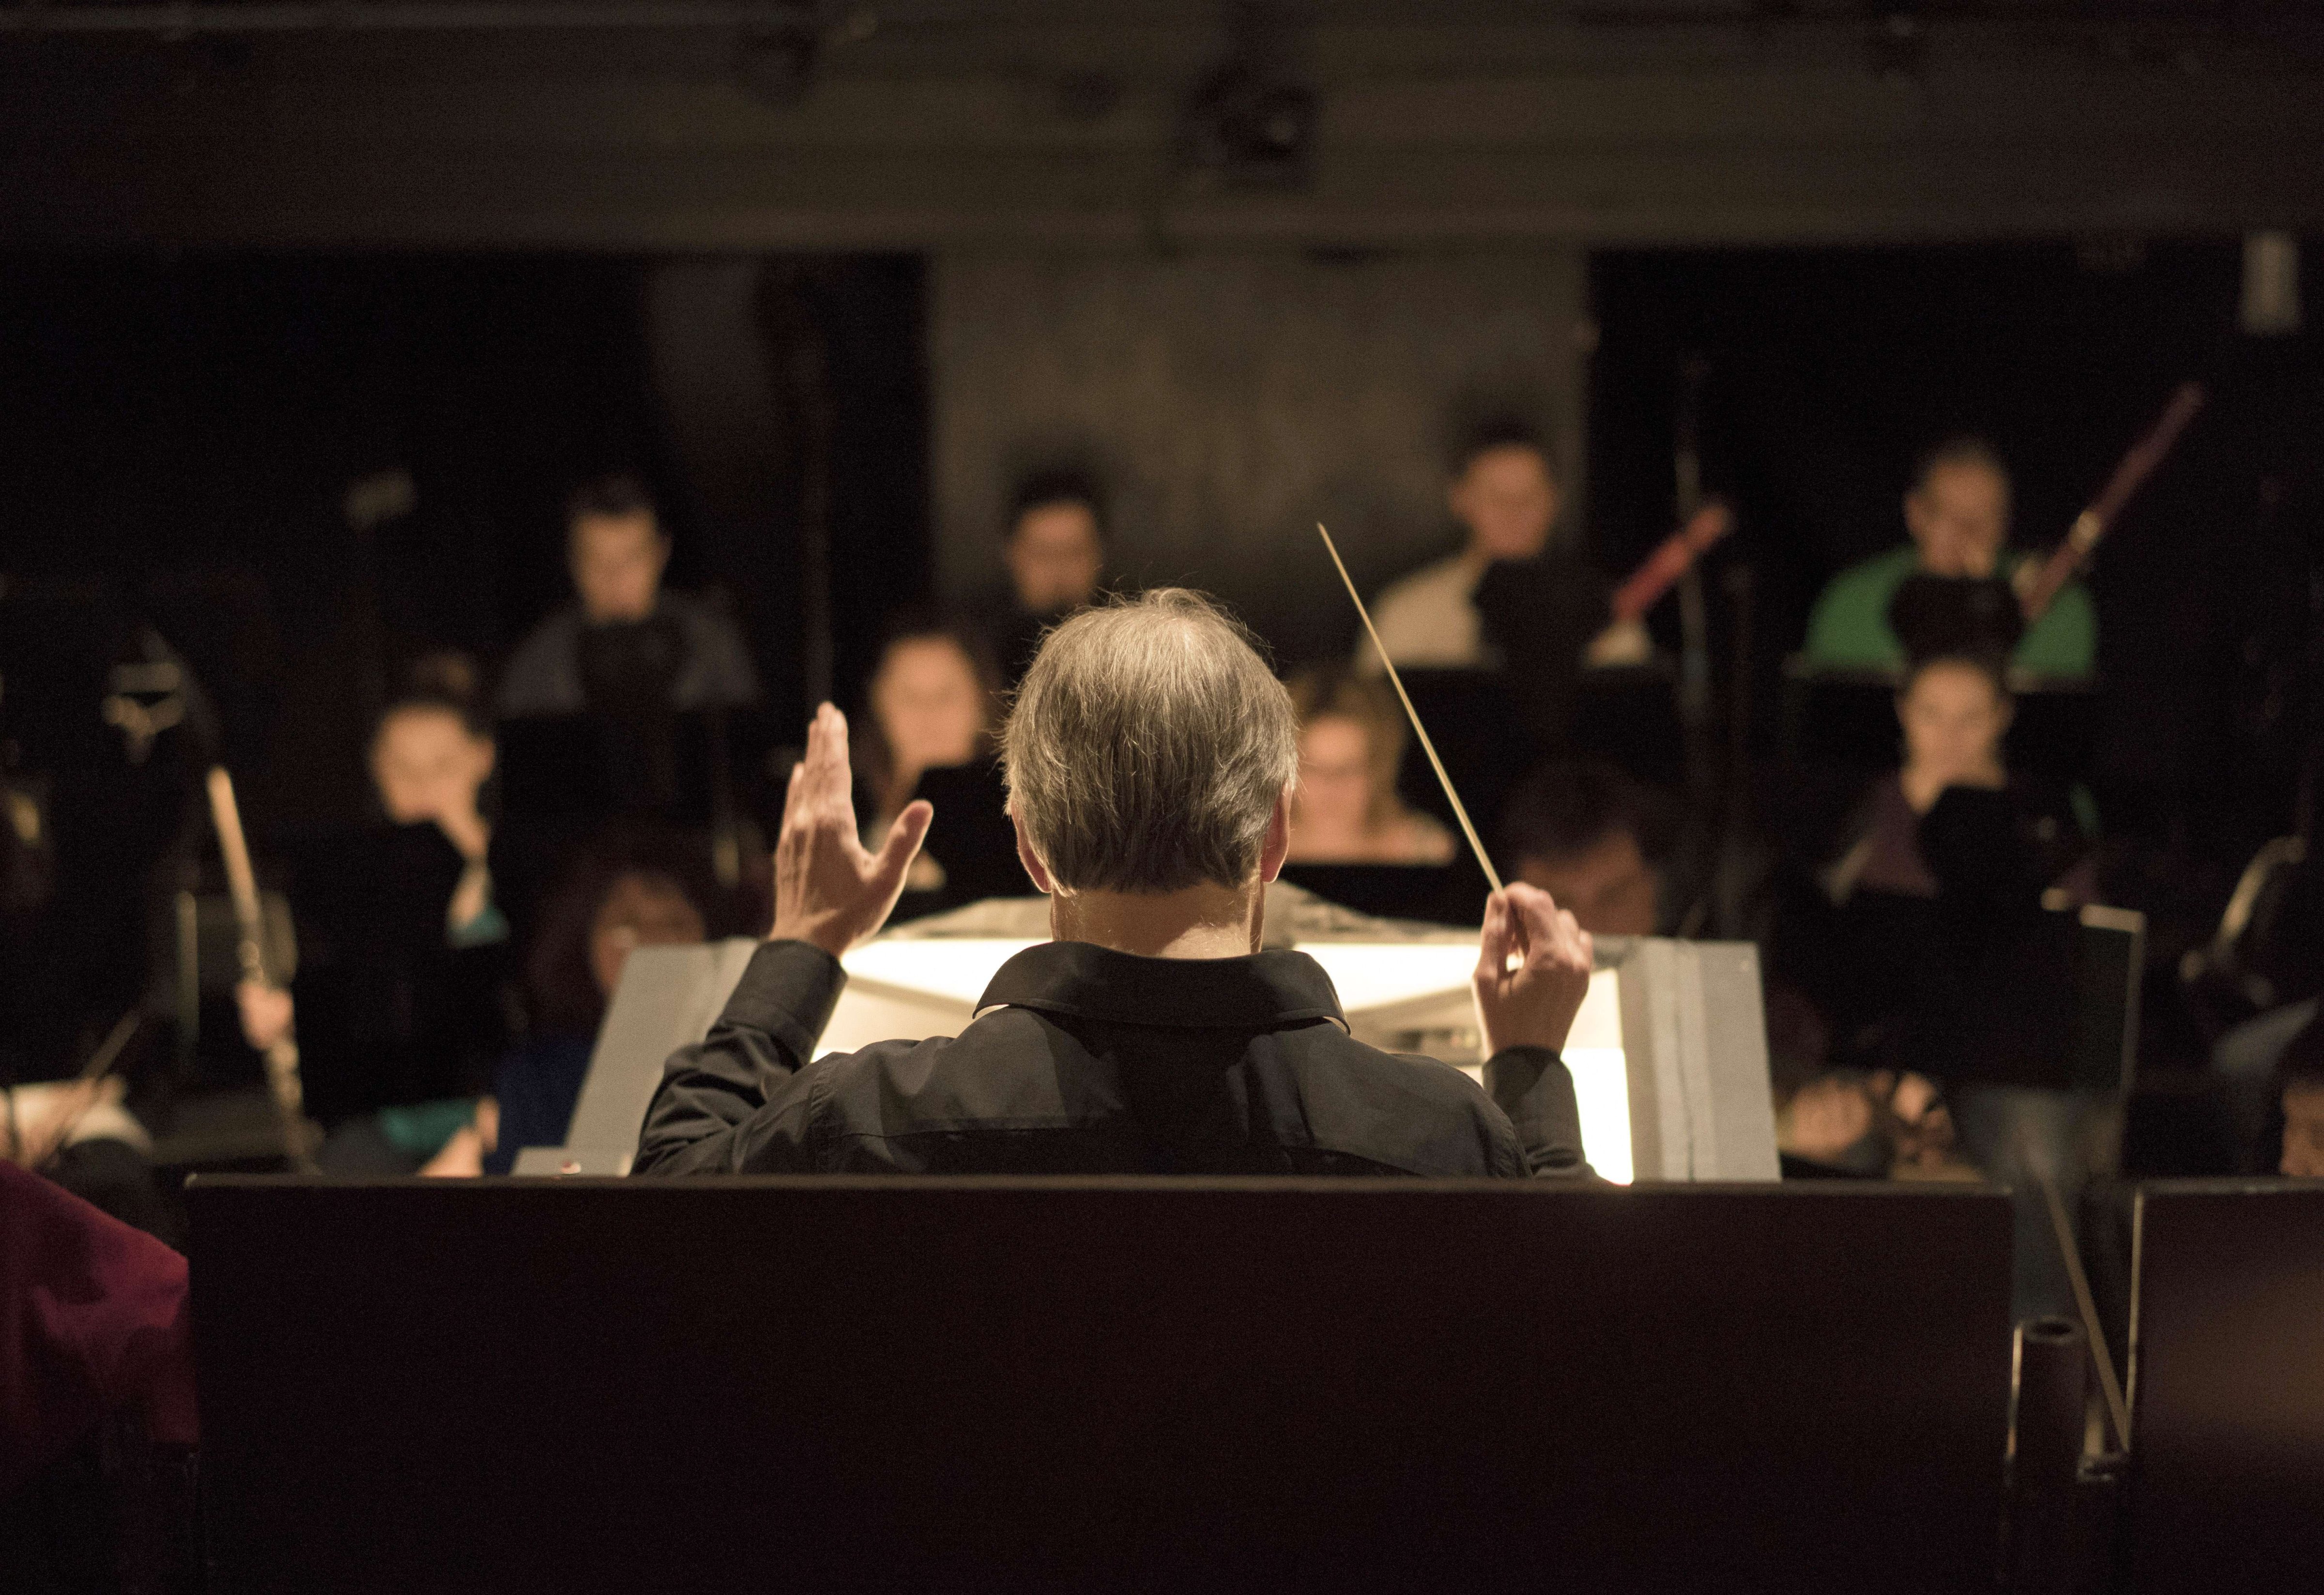 LA Opera music director and conductor James Conlon rehearses  "Lucia Di Lammermoor" with the orchestra at Los Angeles Music Center on the on March 7, 2014 in Los Angeles. (Joe Klamar—AFP/Getty Images)